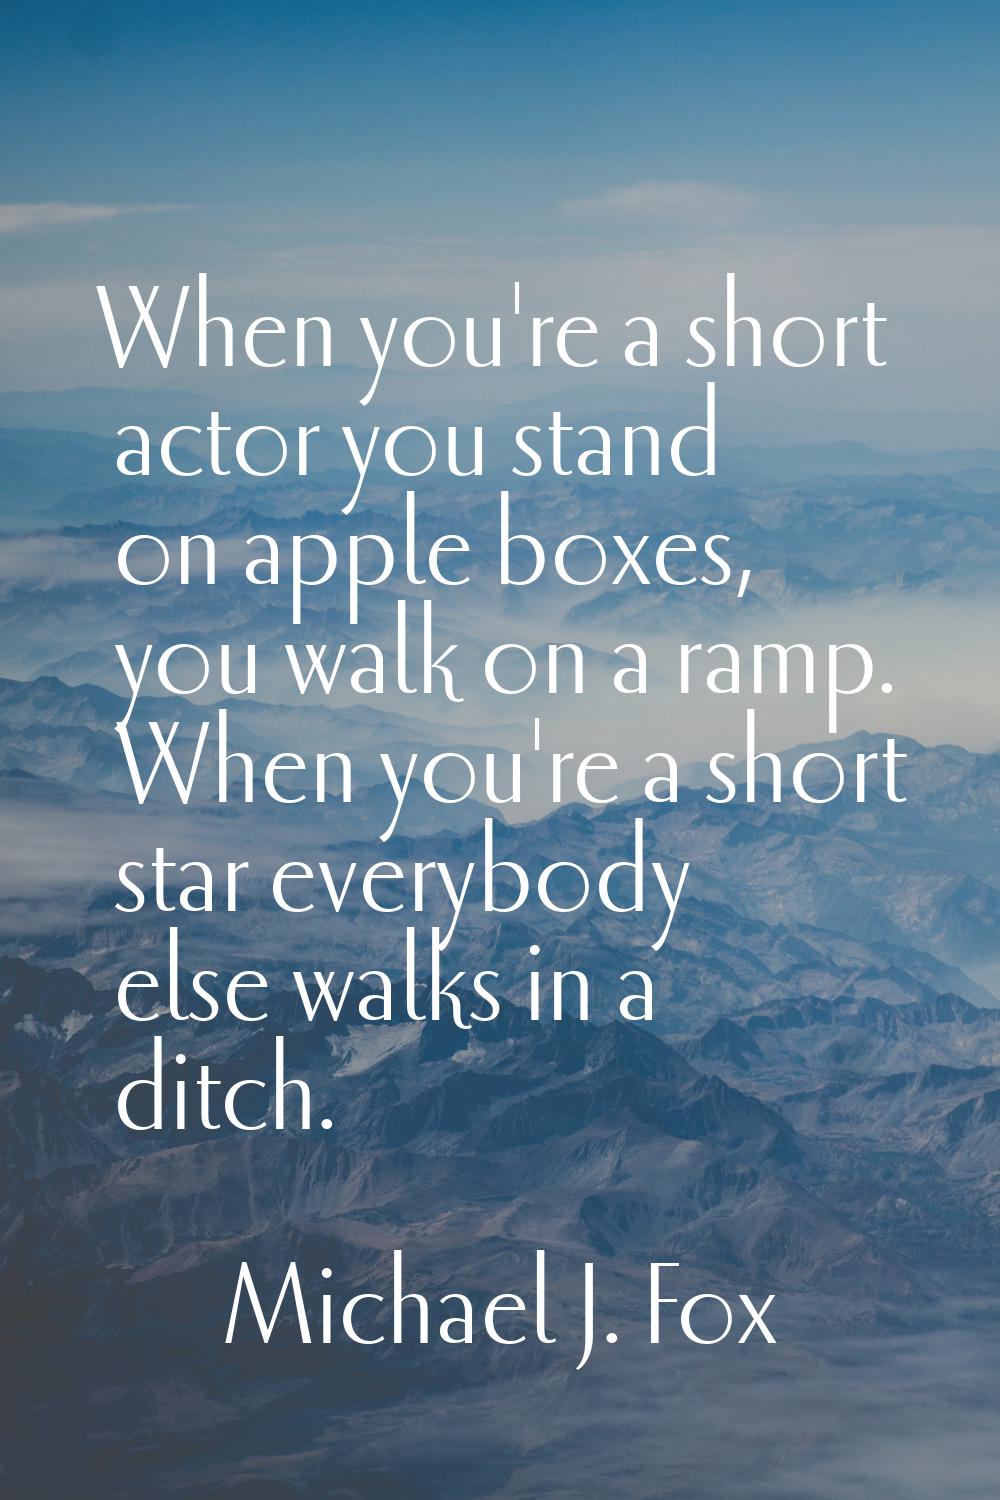 When you're a short actor you stand on apple boxes, you walk on a ramp. When you're a short star ev